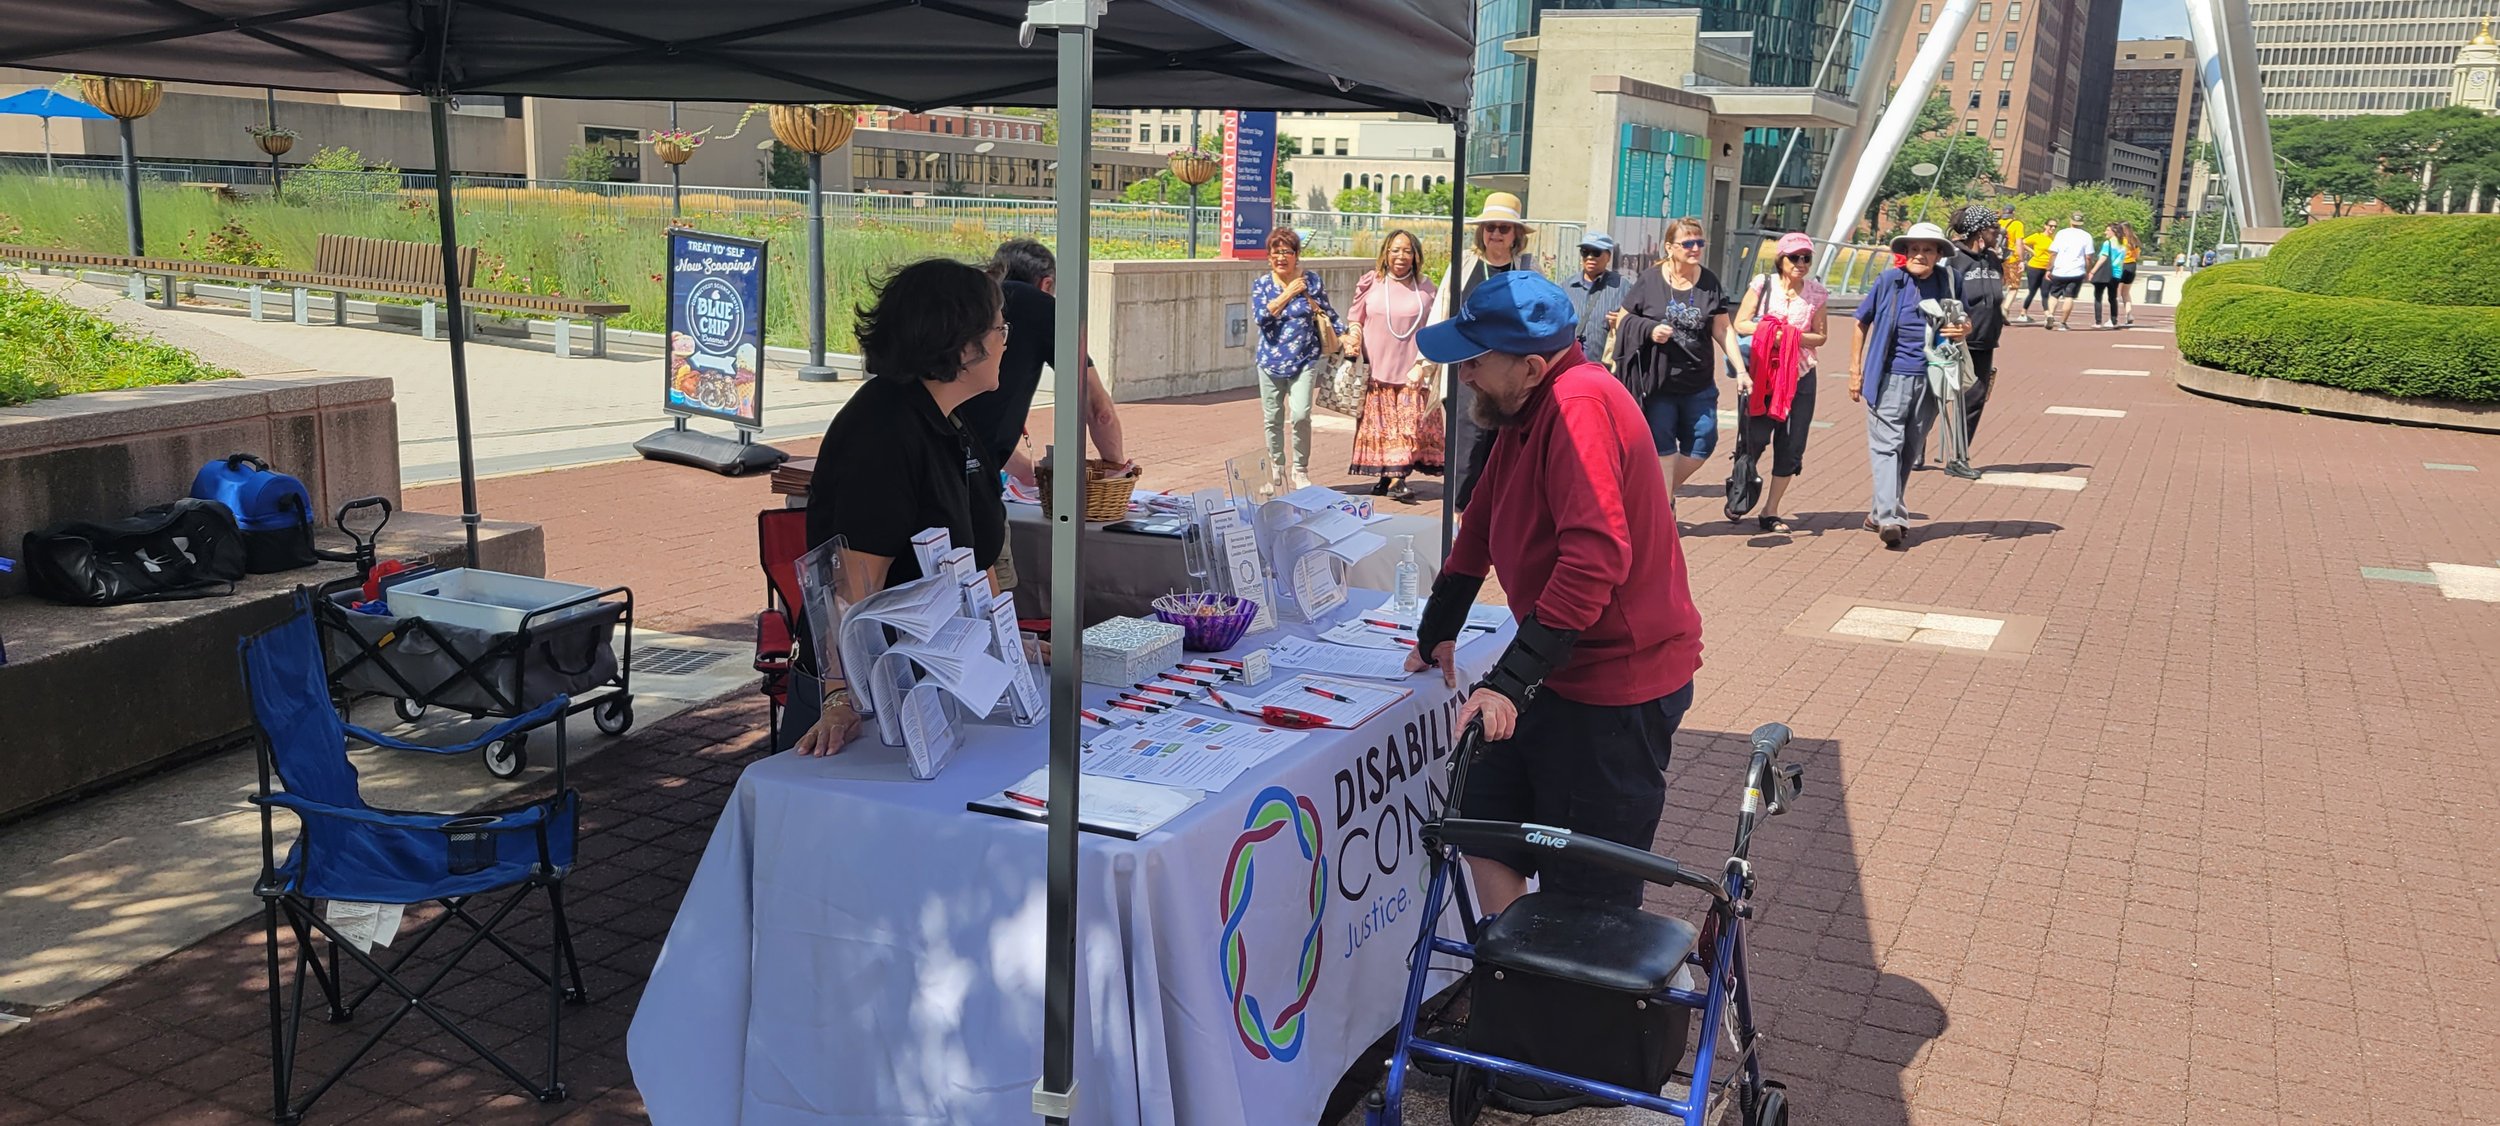  DRCT alum and volunteer Siobhan Morgan at the DRCT resource table talking with a man wearing a blue cap, red sweatshirt and black shorts, who is resting his right arm on the DRCT table, and his left hand is holding onto his walker that has wheels on